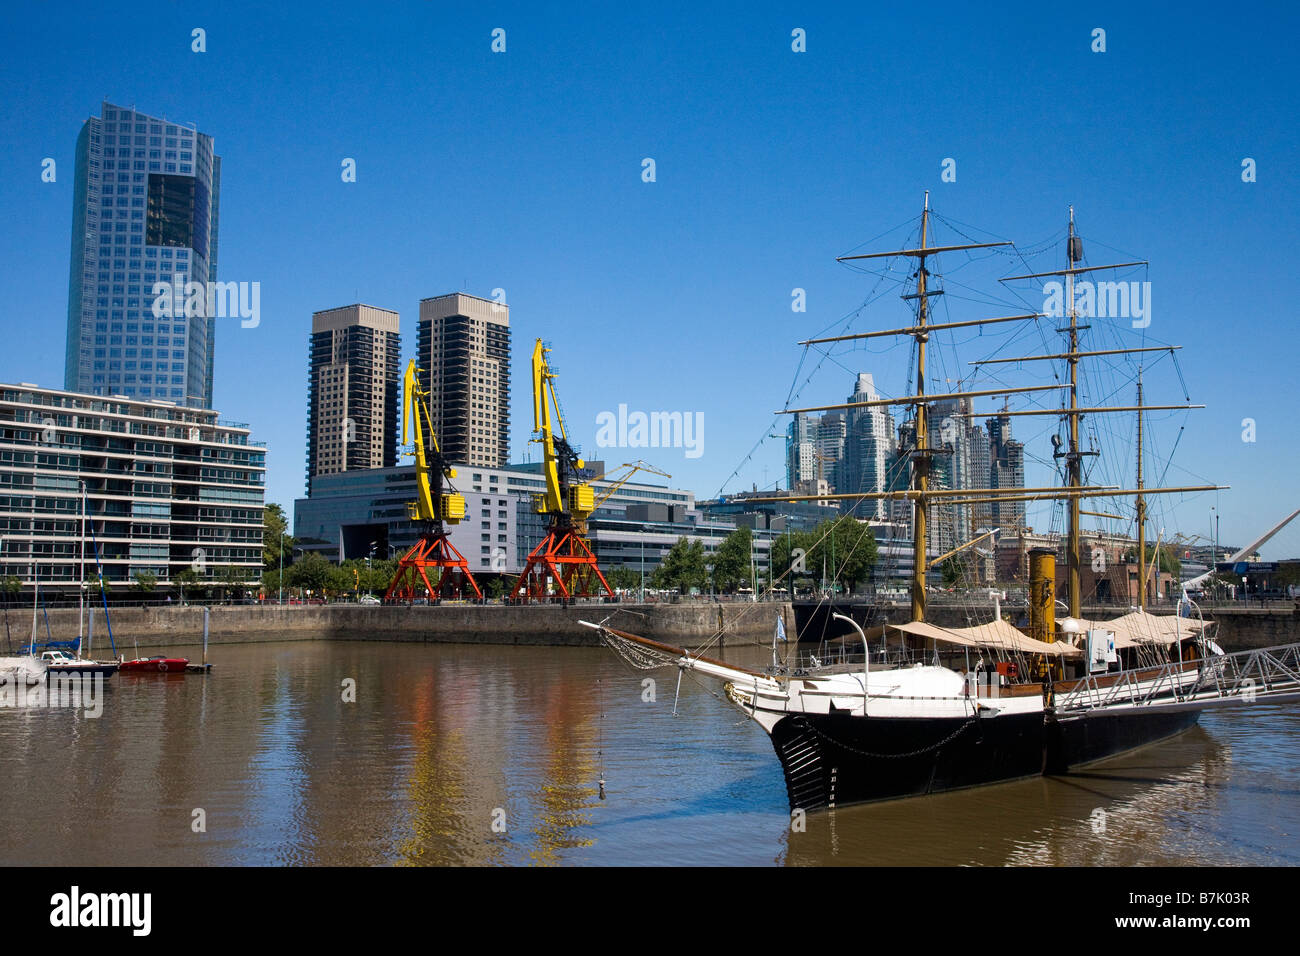 Corbeta Uruguay expedition ship in Puerto Madero harbor harbour Buenos Aires Argentina South America Stock Photo